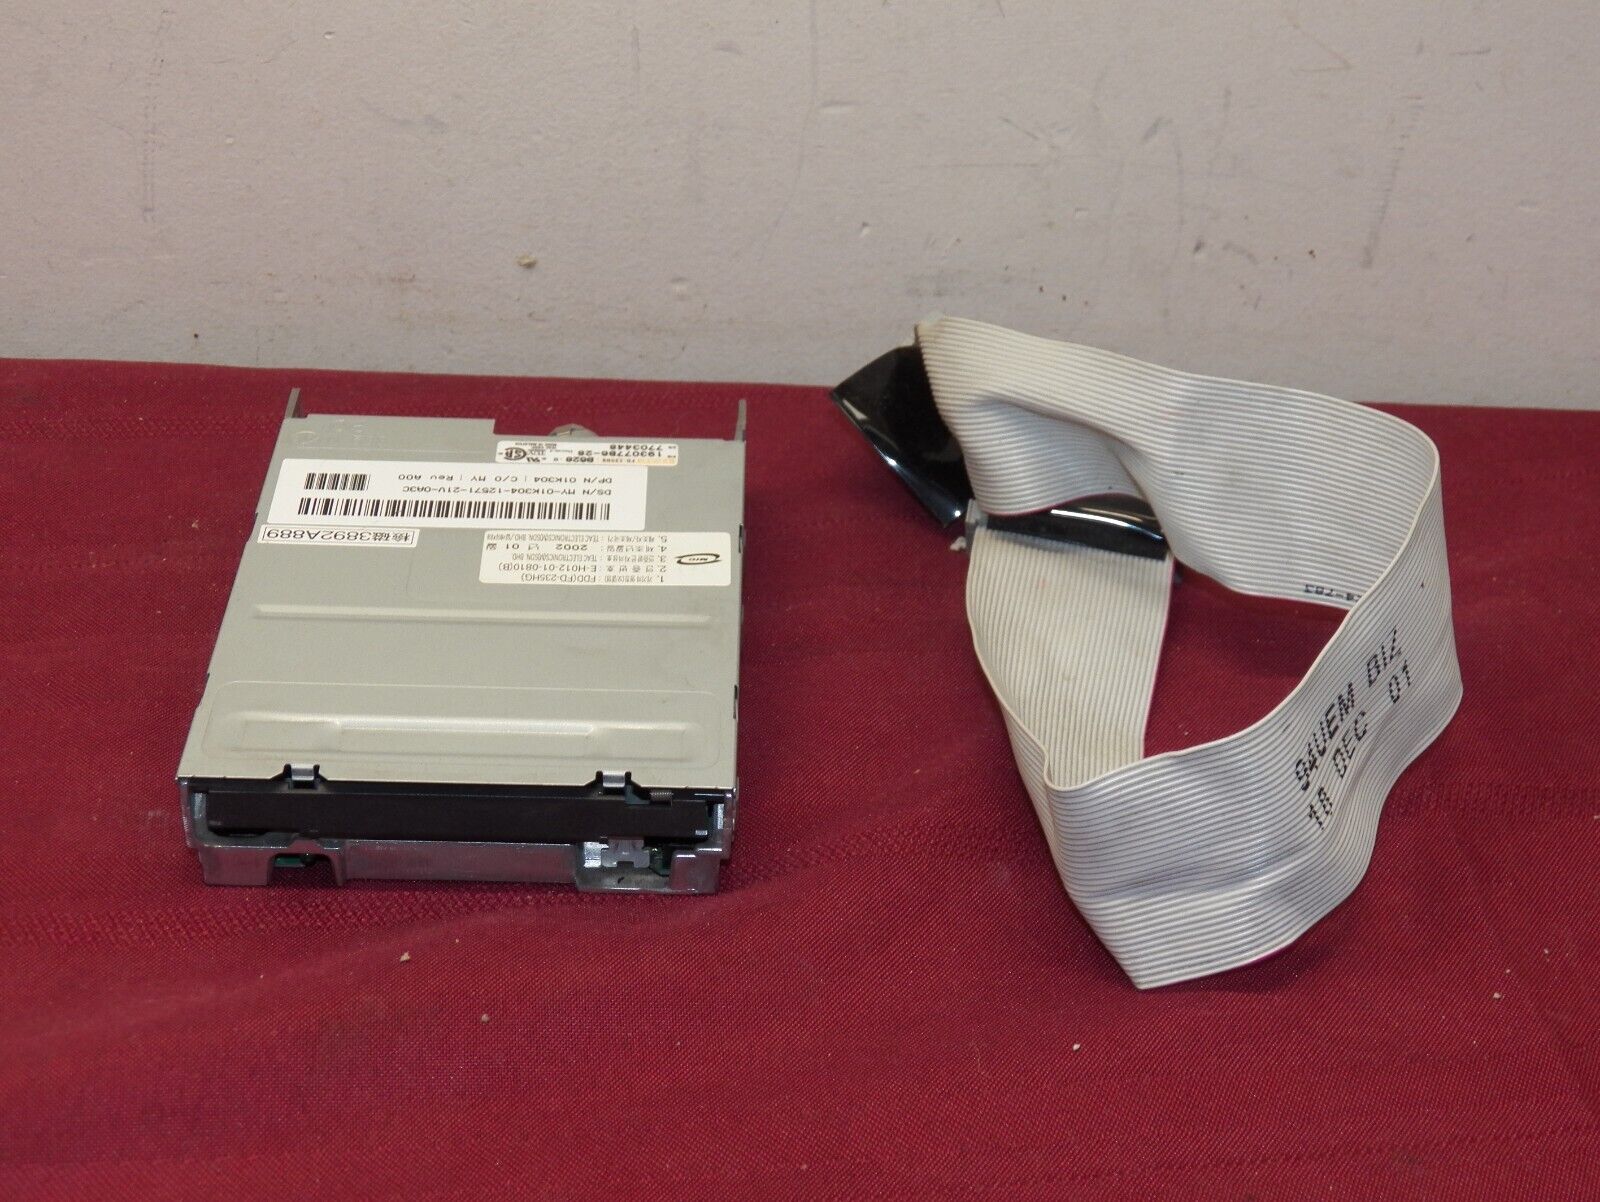 OEM Dell 1K304 TEAC 3.5 Inch 1.44MB Floppy Disk Drive With Cable